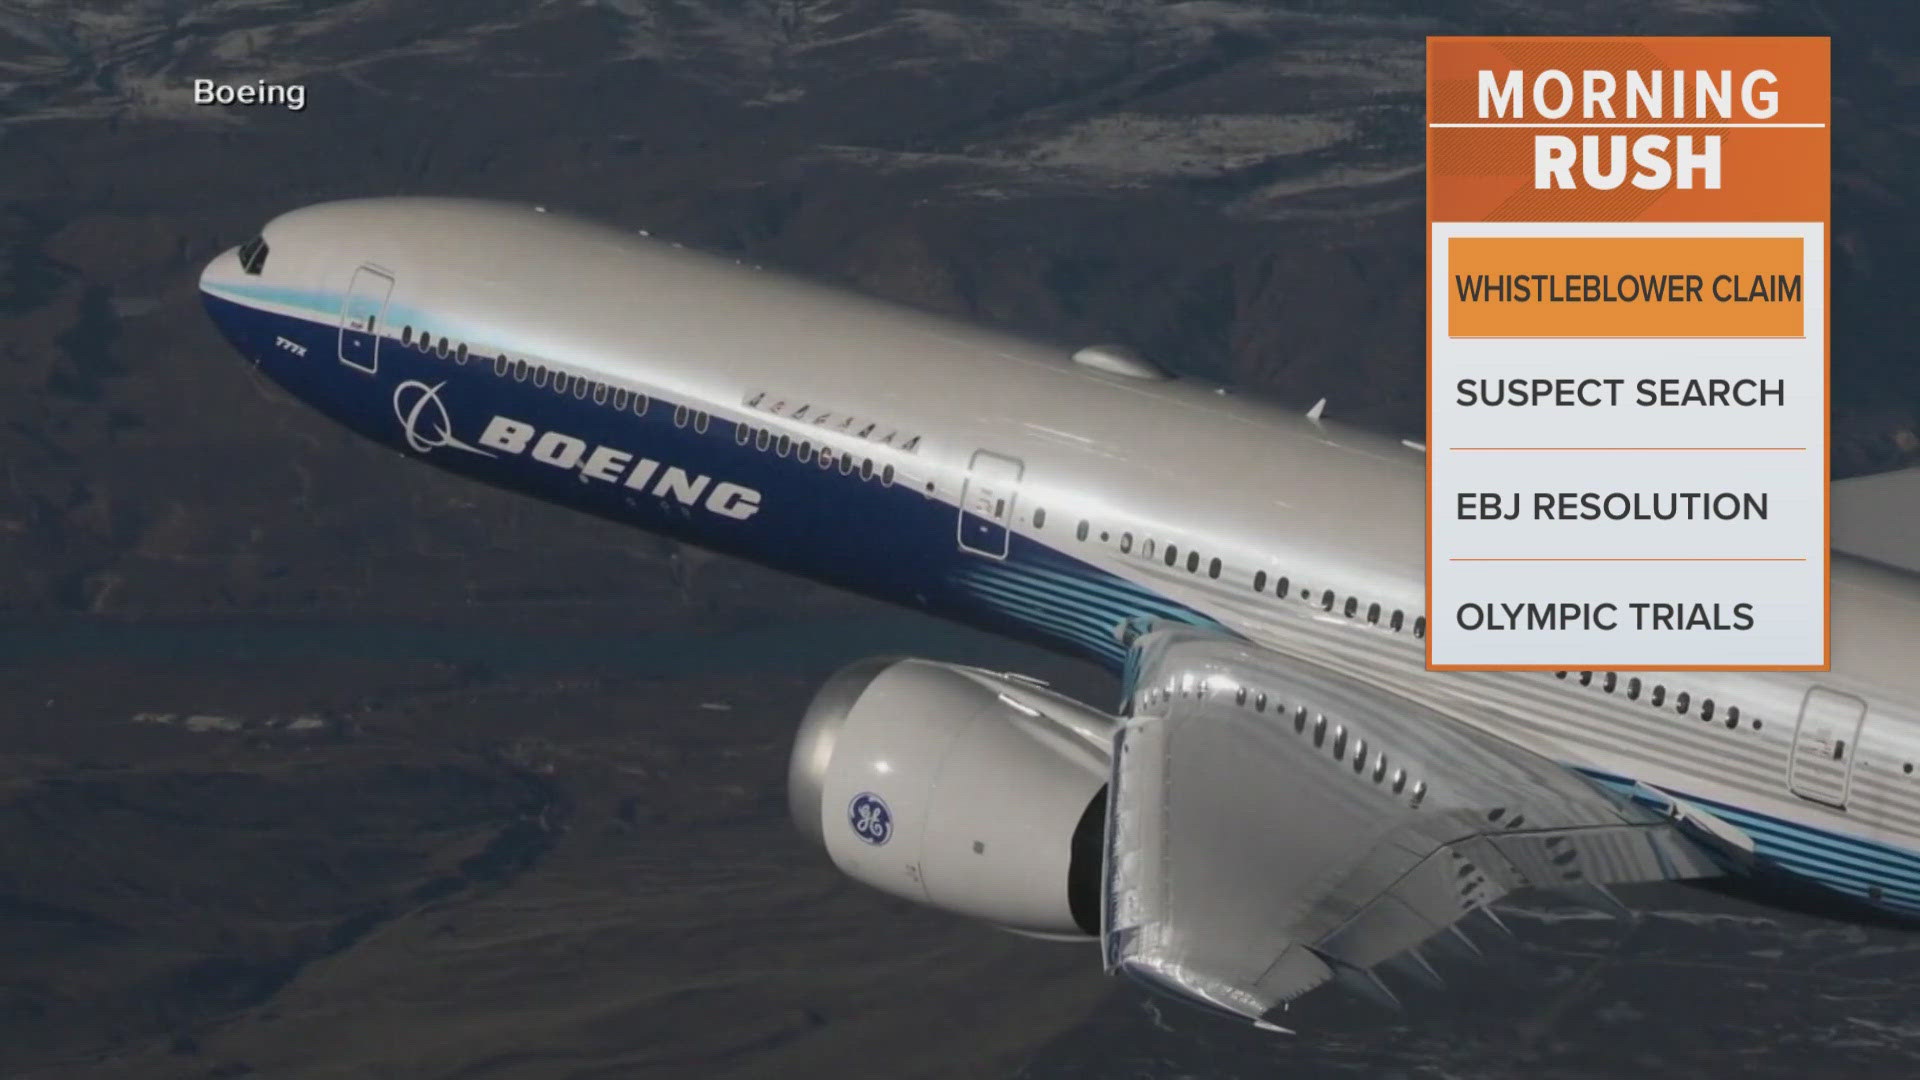 Boeing said they investigated his concerns and found no evidence to support his claims.